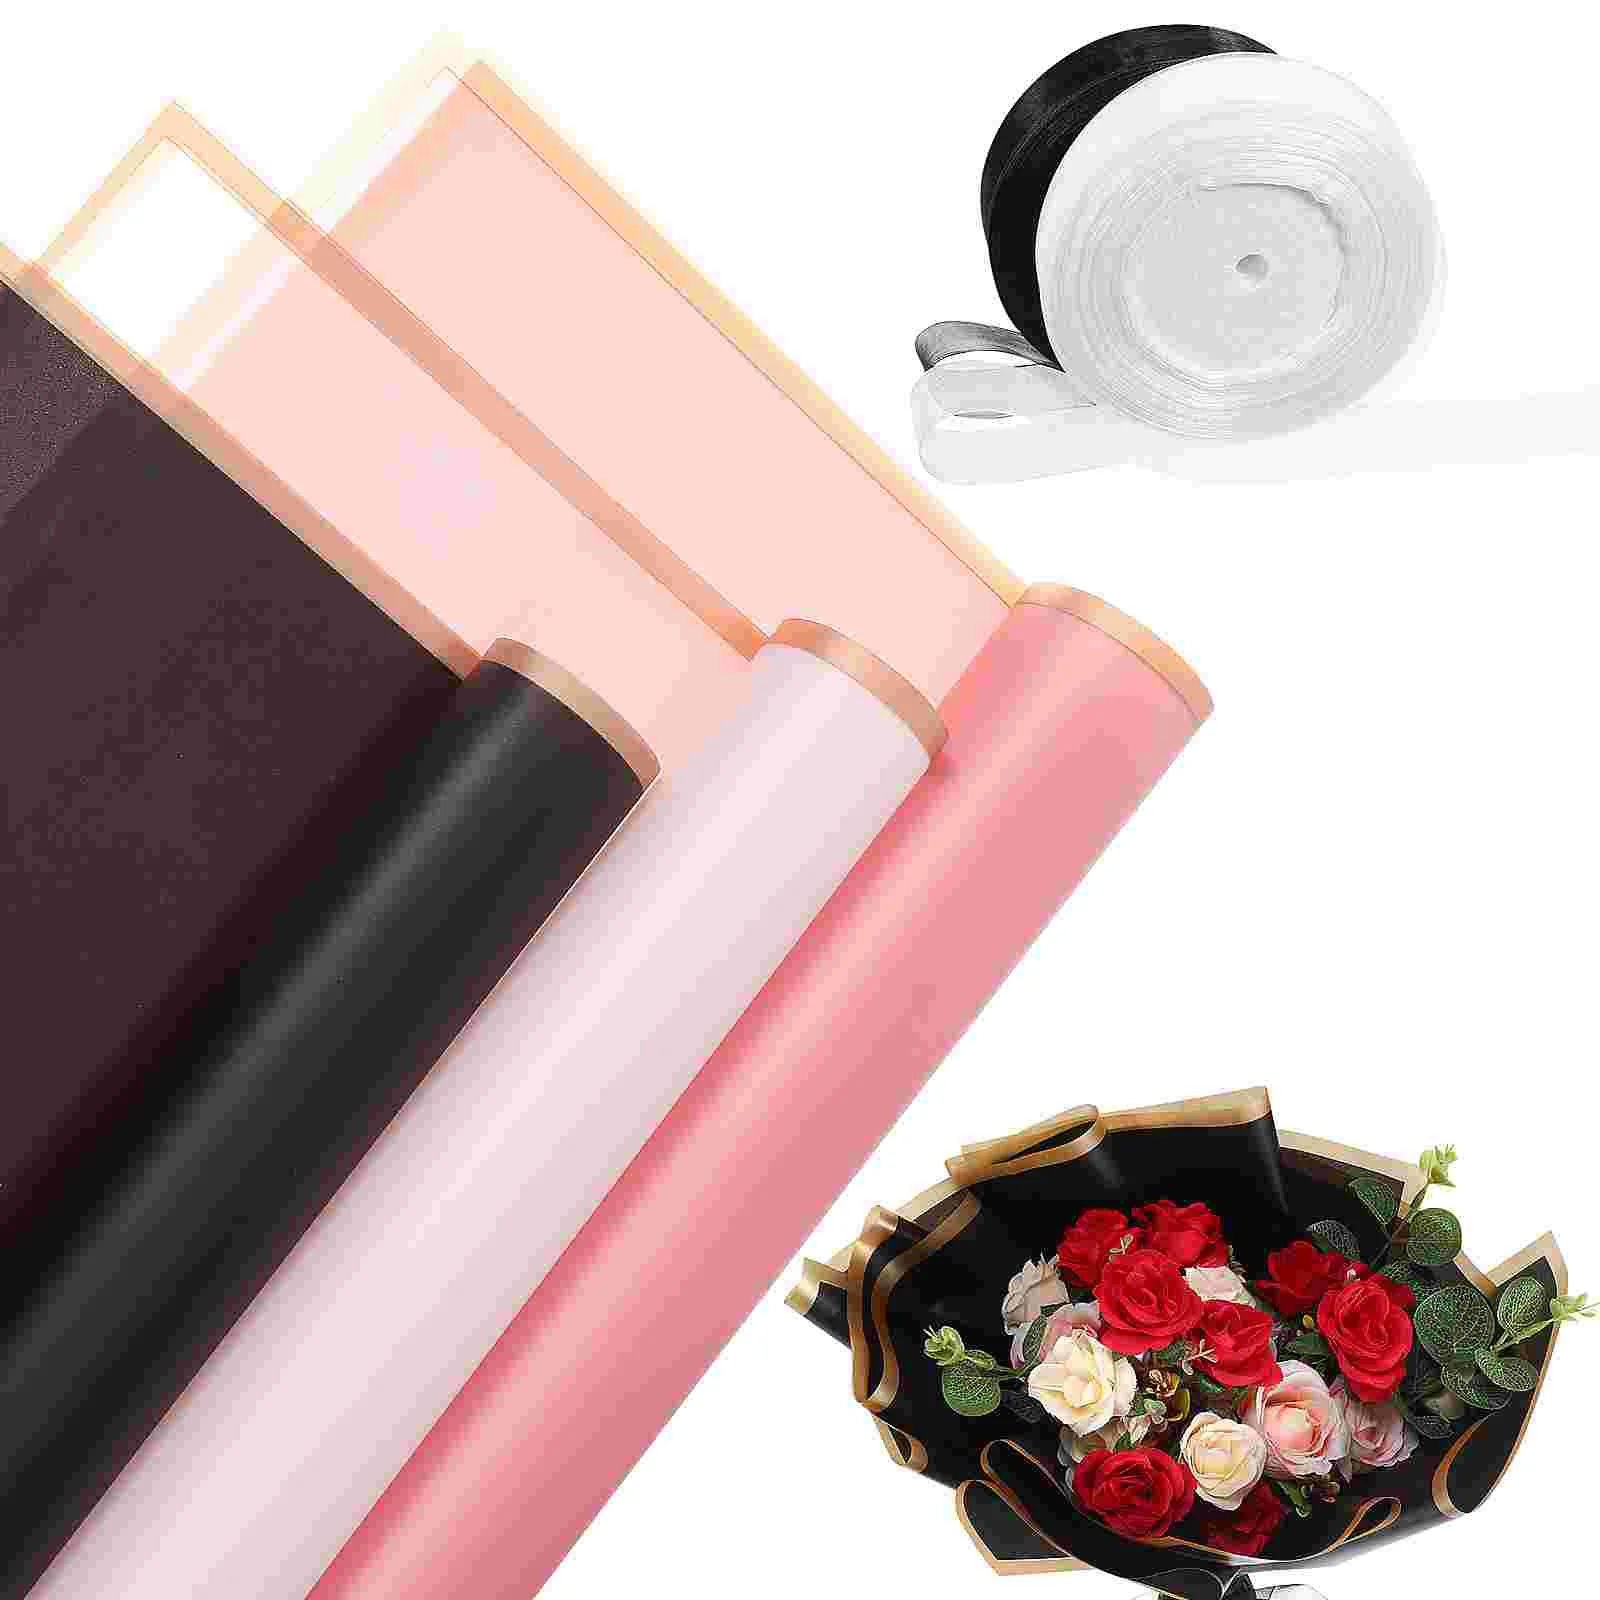 

60 Sheets Bouquet Wrapping Paper Flower Bouquet Wrapping Paper Floral Packaging Paper With Ribbons